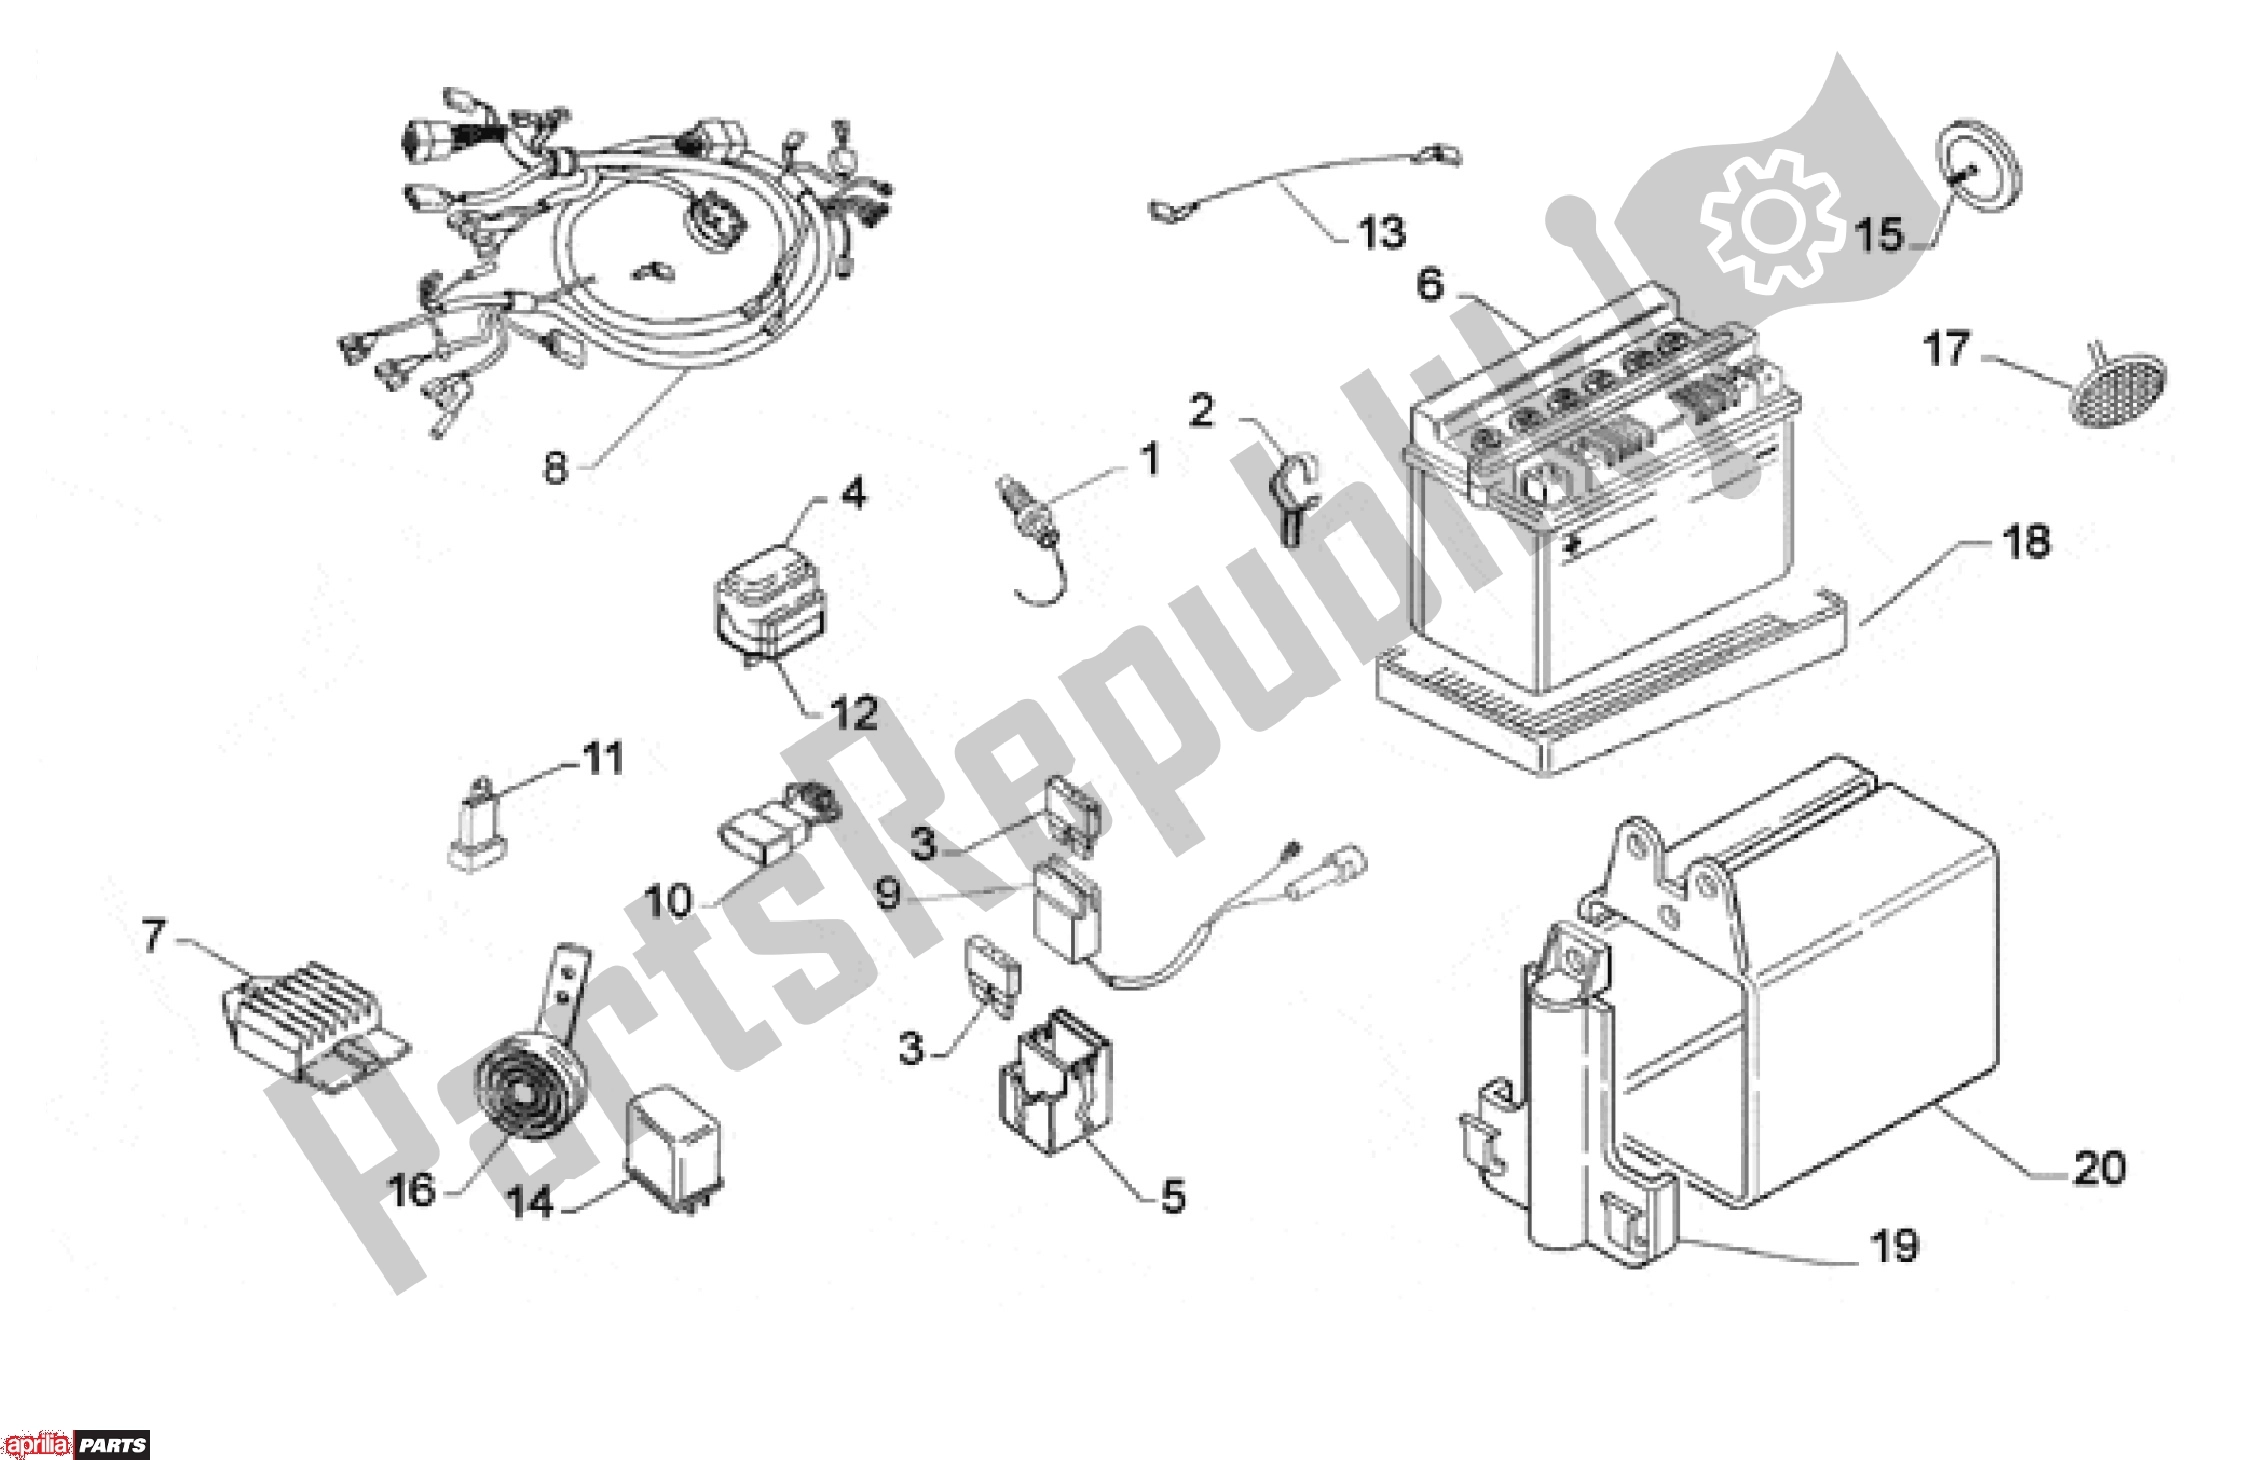 All parts for the Battery of the Aprilia Scarabeo 507 1993 - 1997